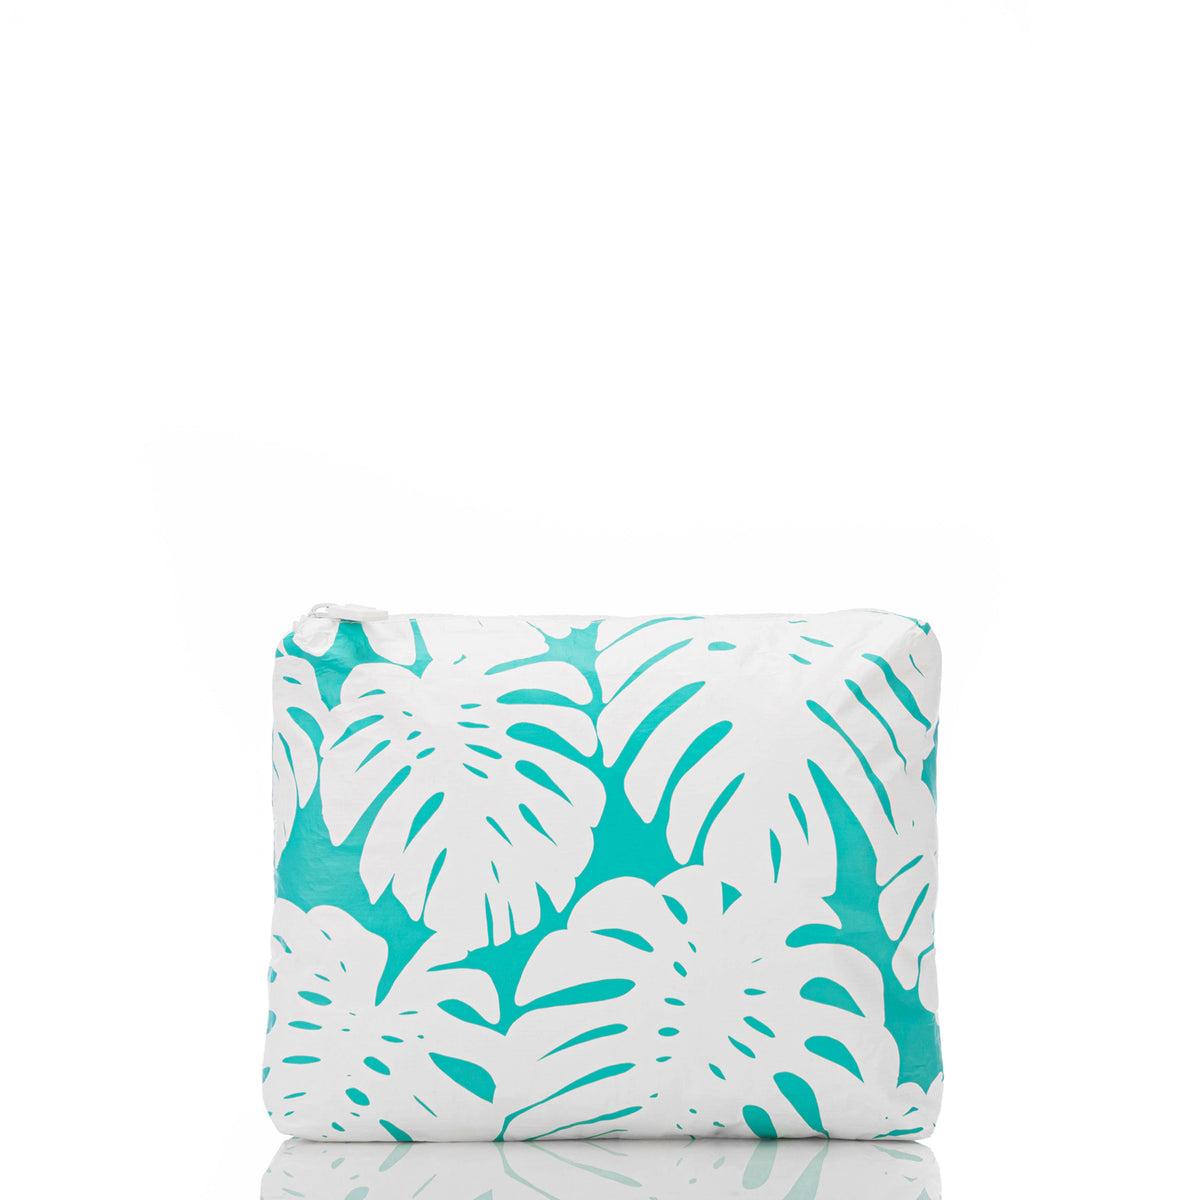 Small Manoa Pouch in Ocean